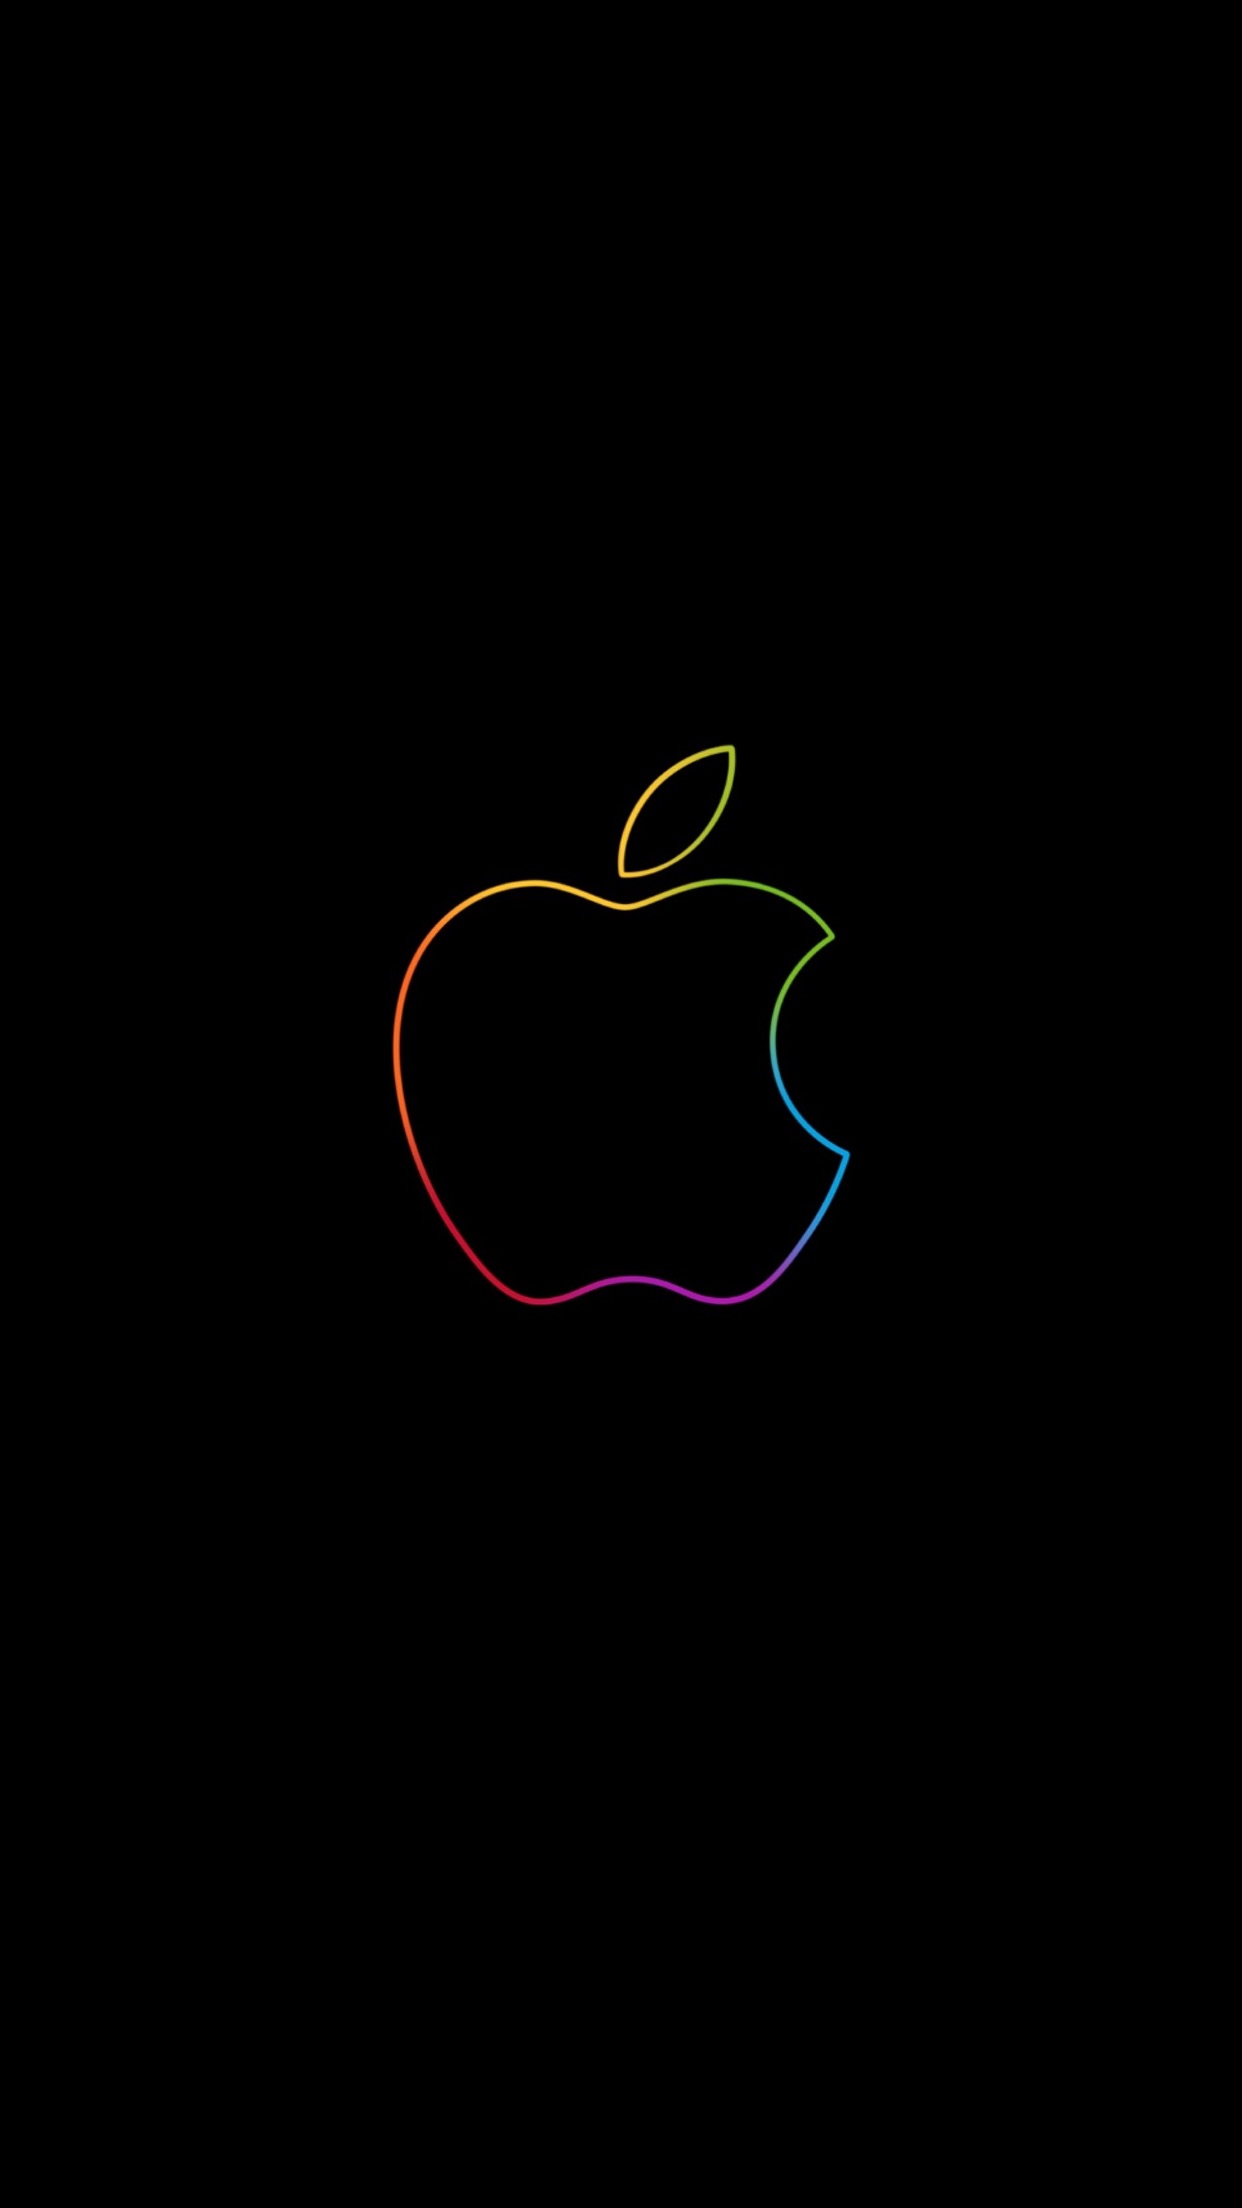 Download Apple Store Wallpapers Featuring The Colorful Apple Logo - iOS ...